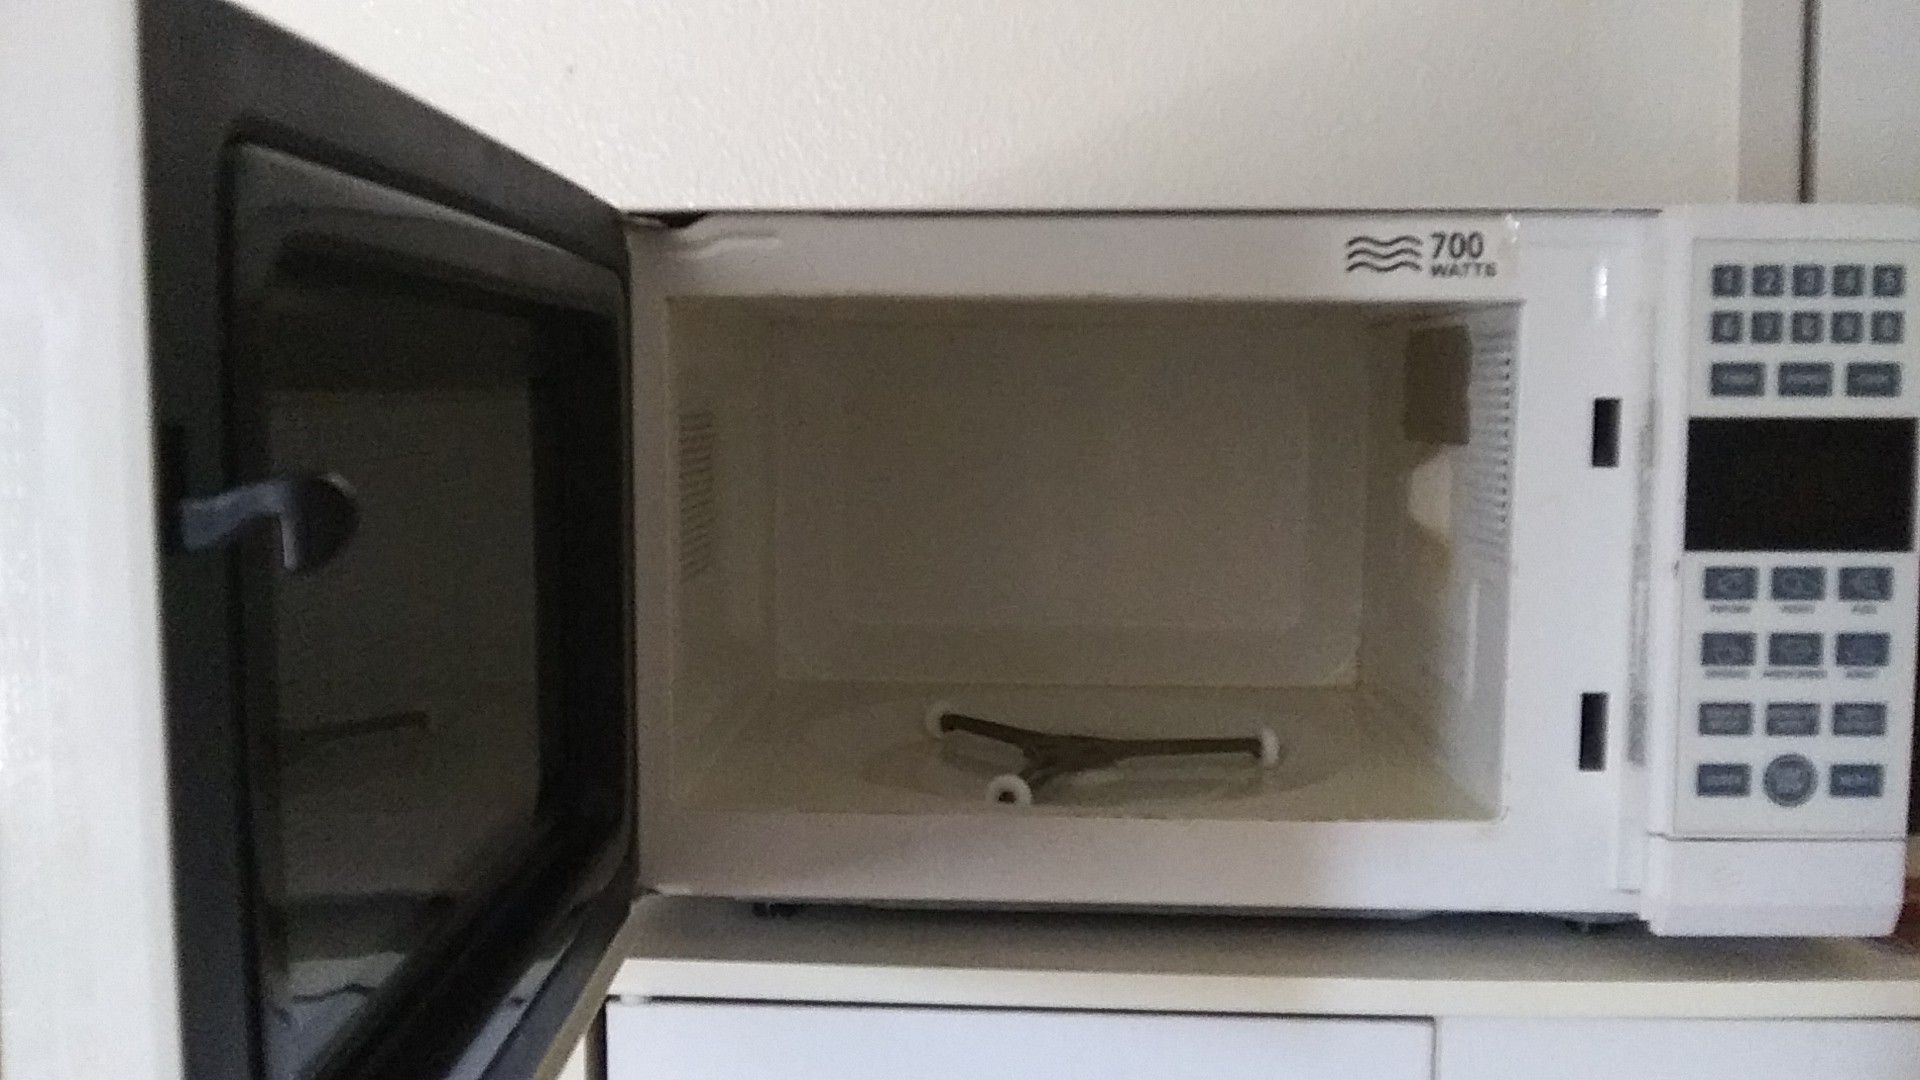 Microwave Make an offer